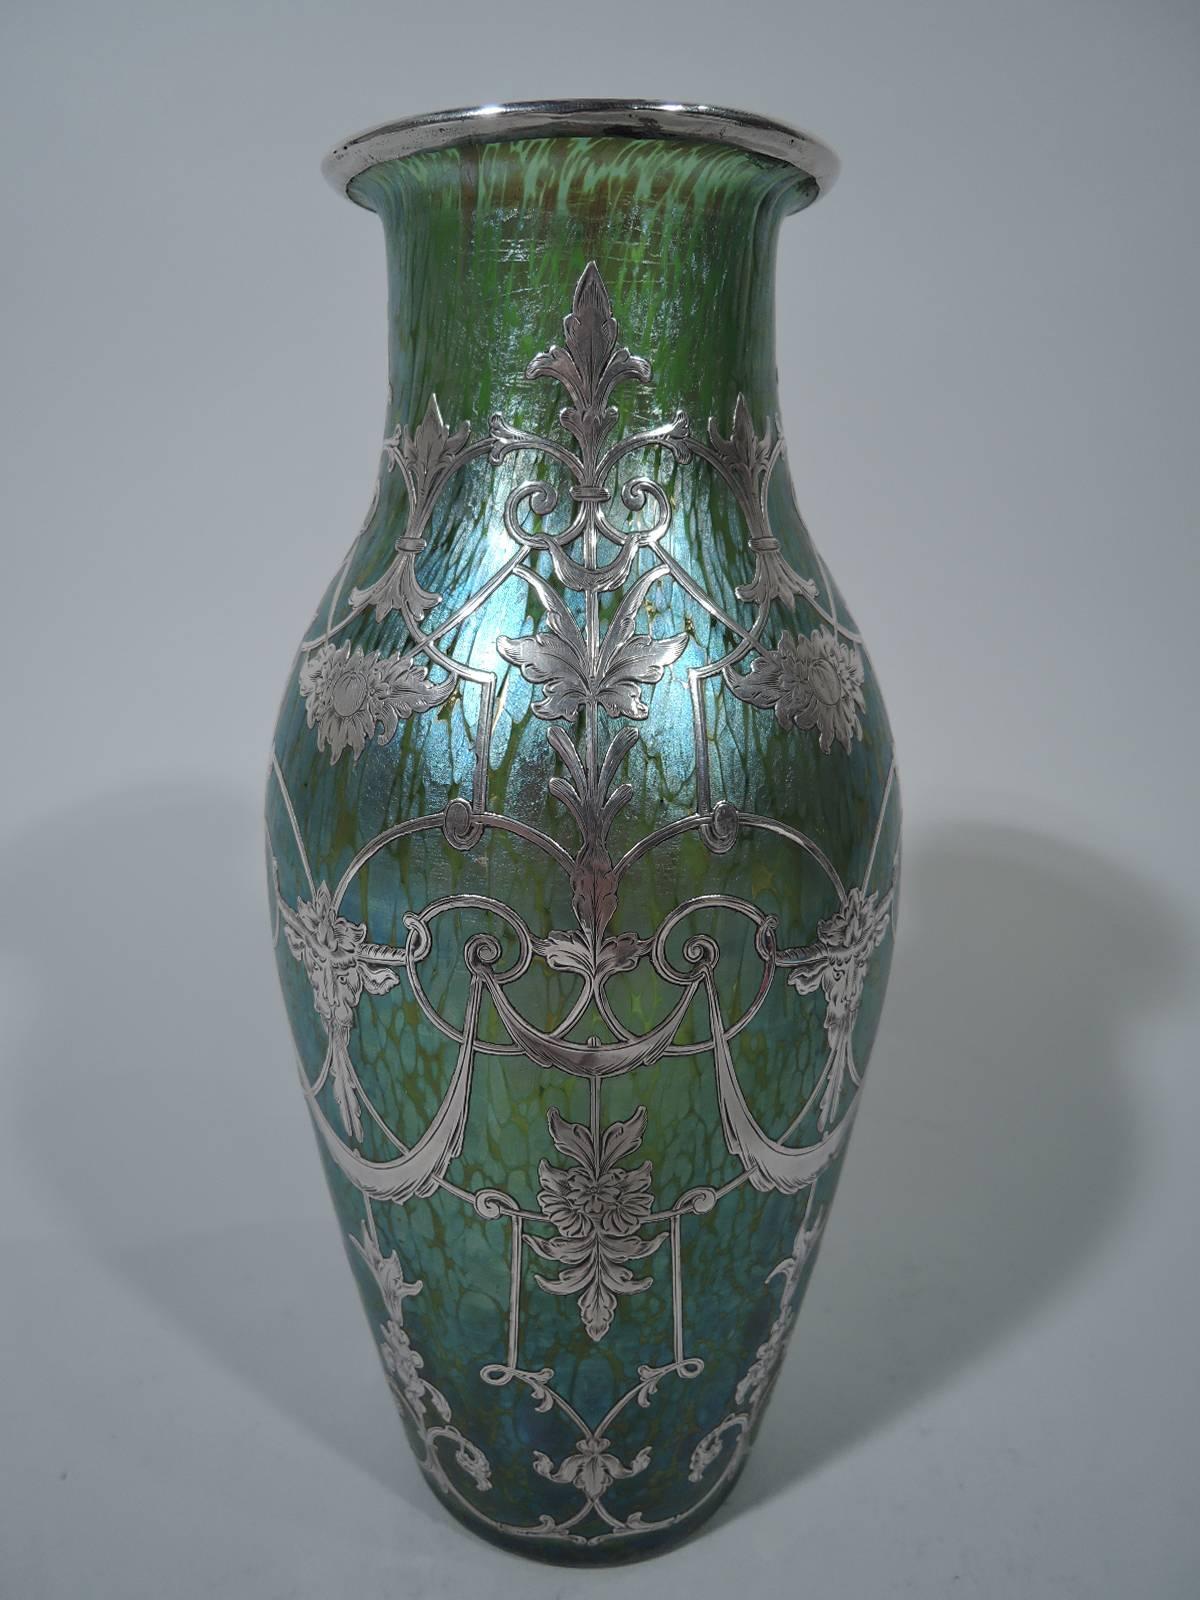 Art glass vase with silver overlay by historic Czech maker Loetz, circa 1900. Baluster with short neck and flat rim. Glass is green with irregular iridescence, and contrasts with the pretty and controlled silver overlay ornament in form of rondeaux,